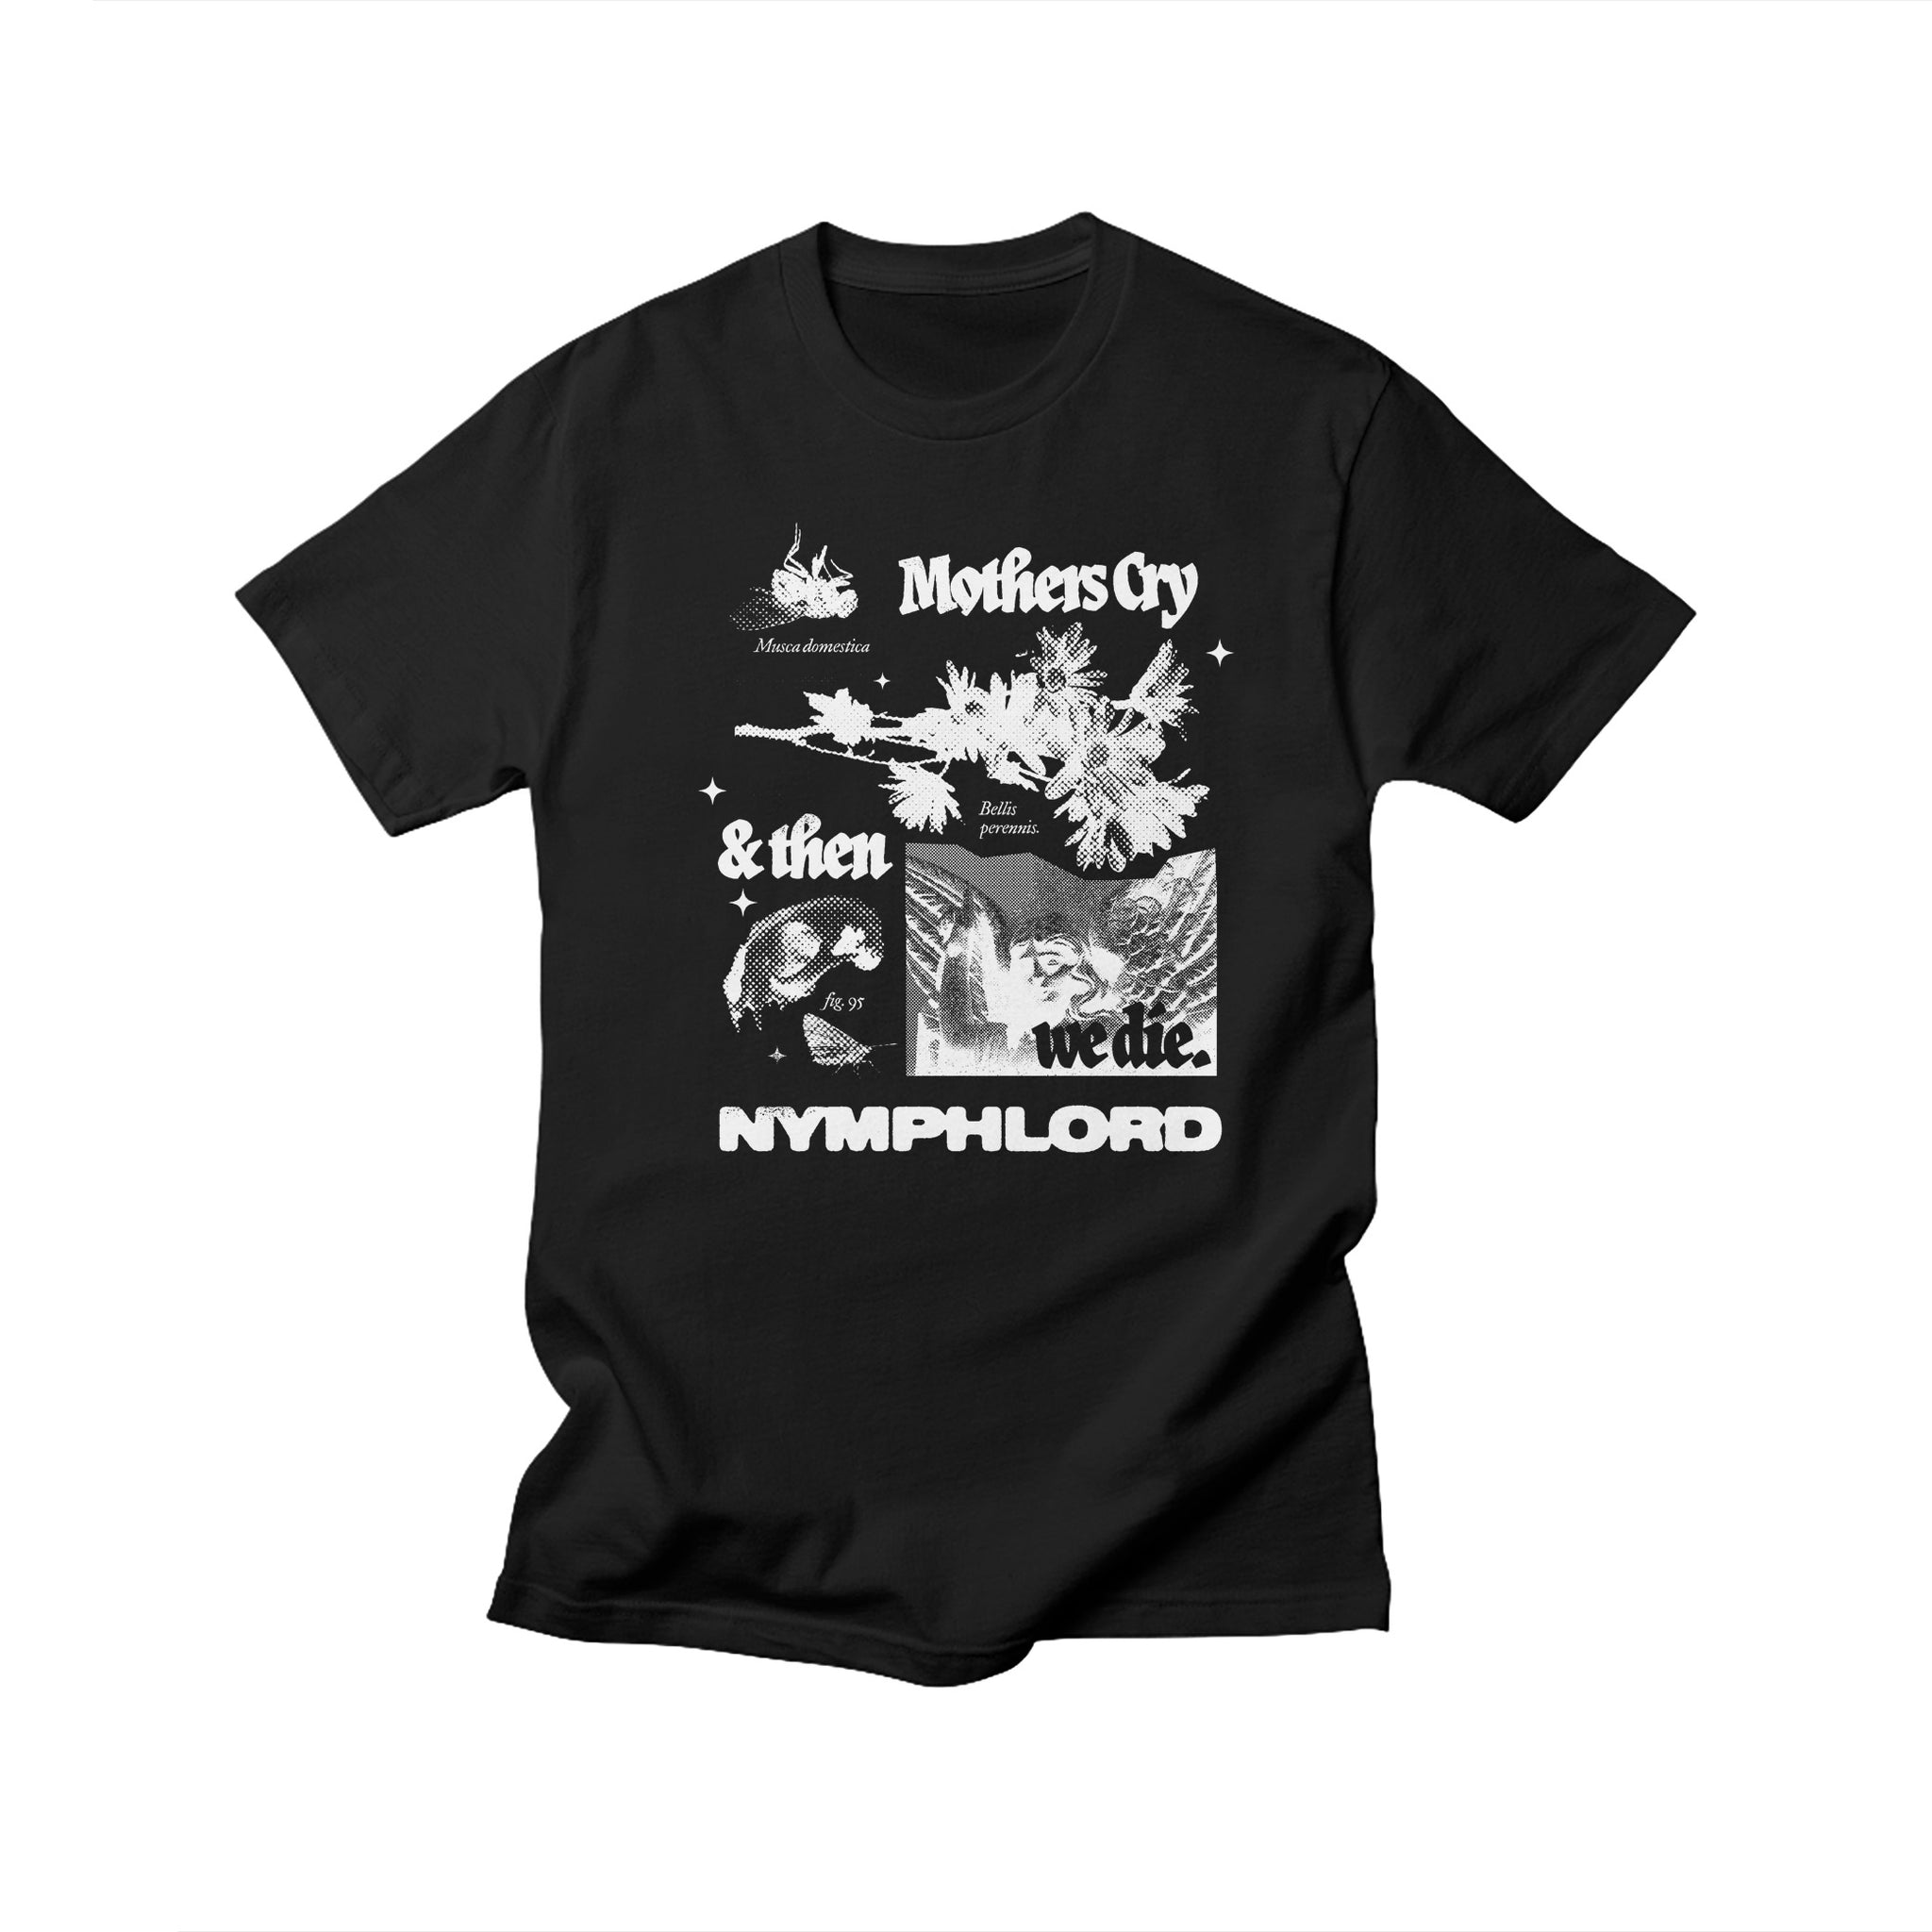 Nymphlord - Mothers Cry And Then We Die. Shirt